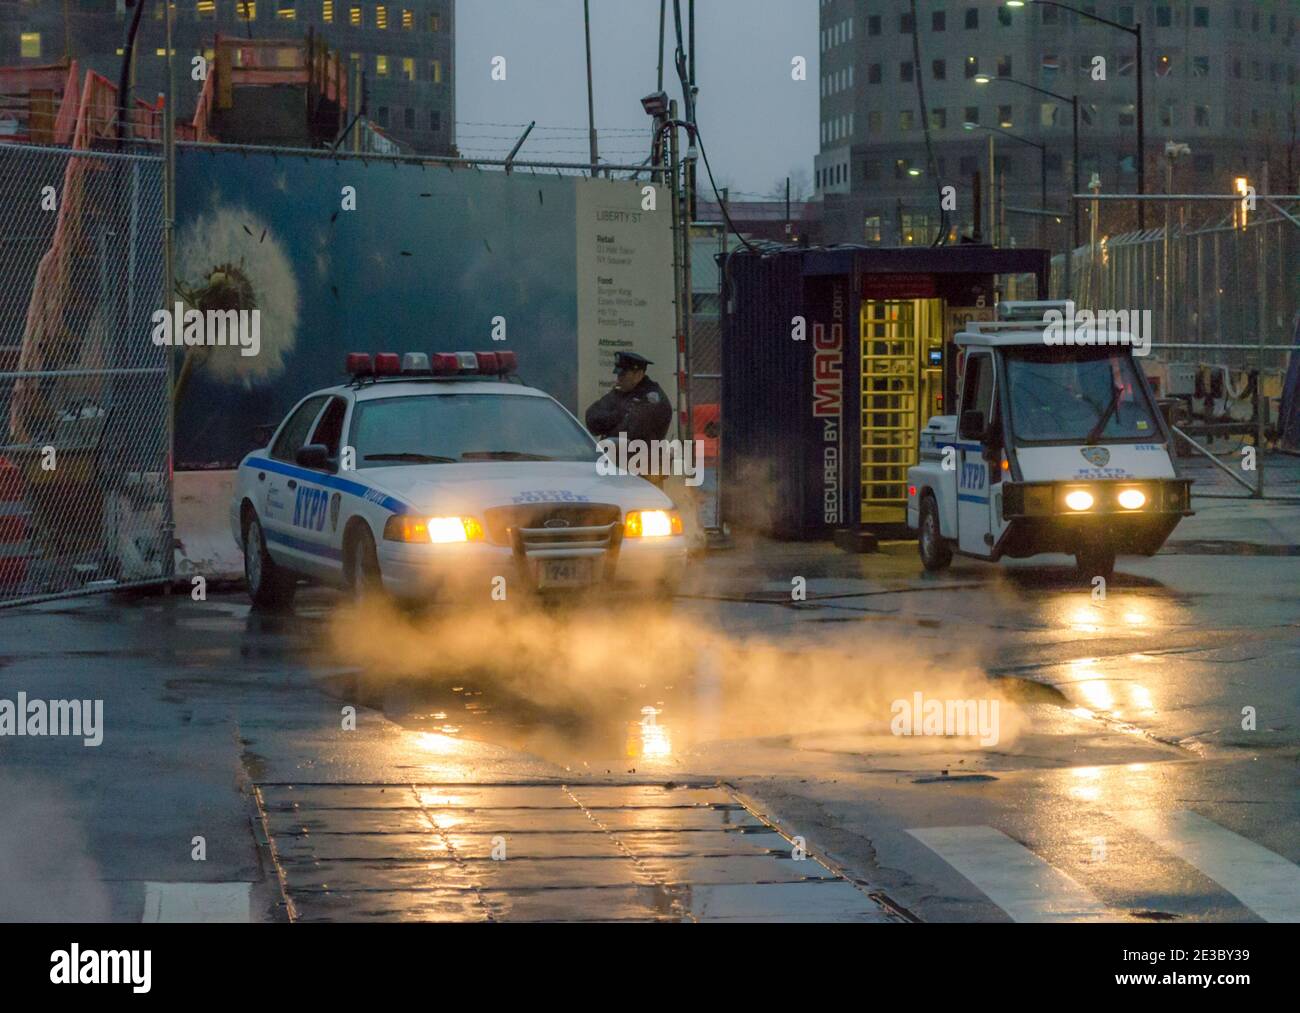 An Officer and a Police Vehicle with its Headlights Shed Light on Steam Coming from the Sewers in Lower Manhattan, New York City, USA Stock Photo